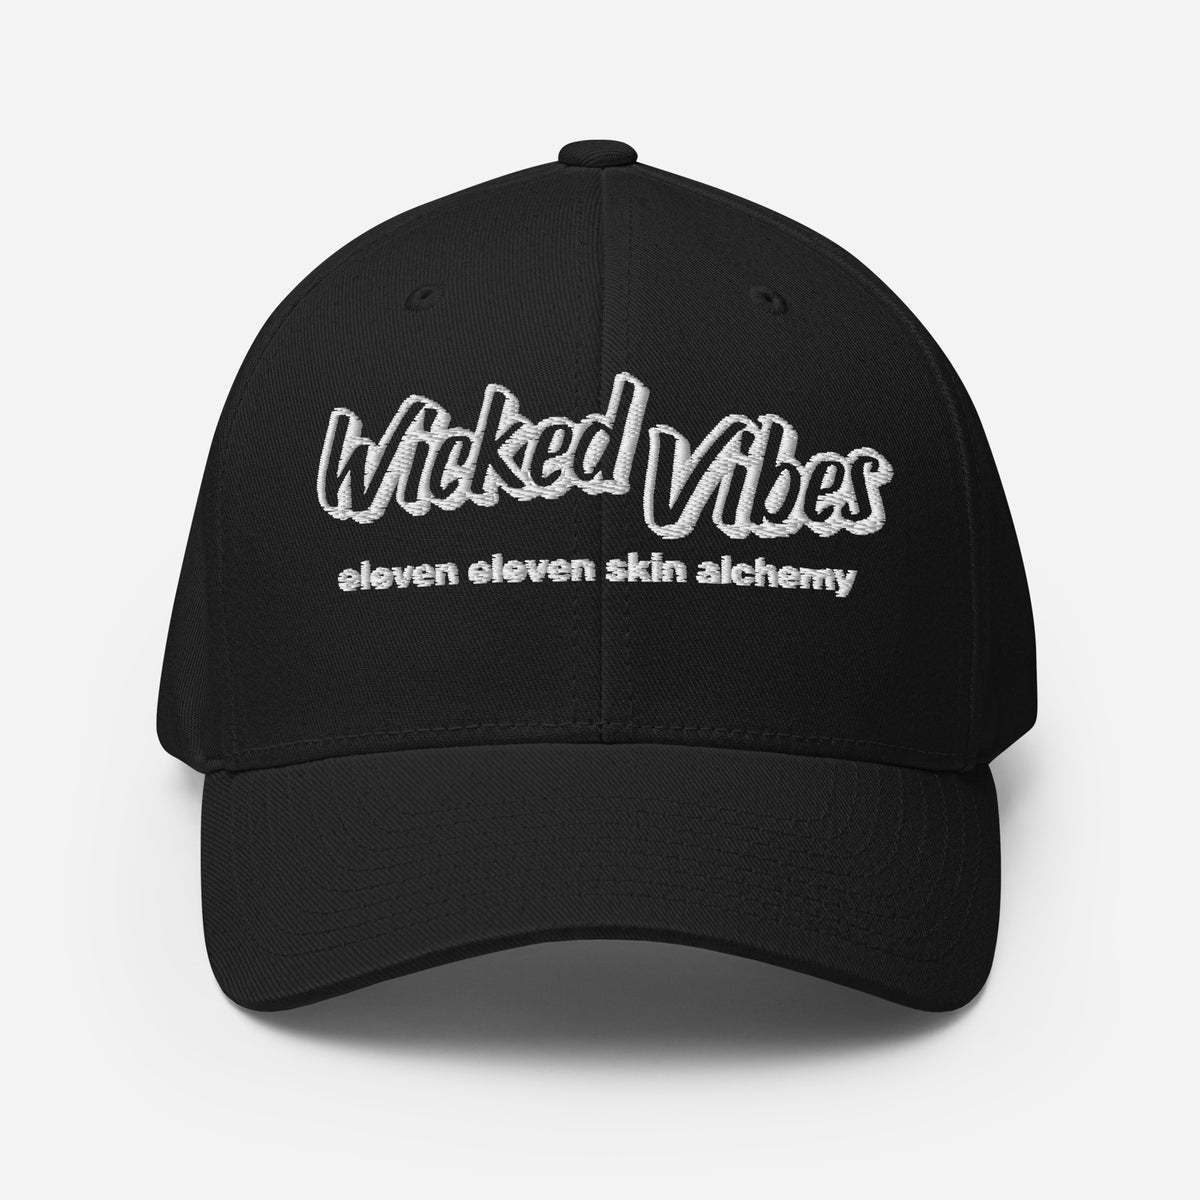 Structured Twill Cap - Wicked Vibes